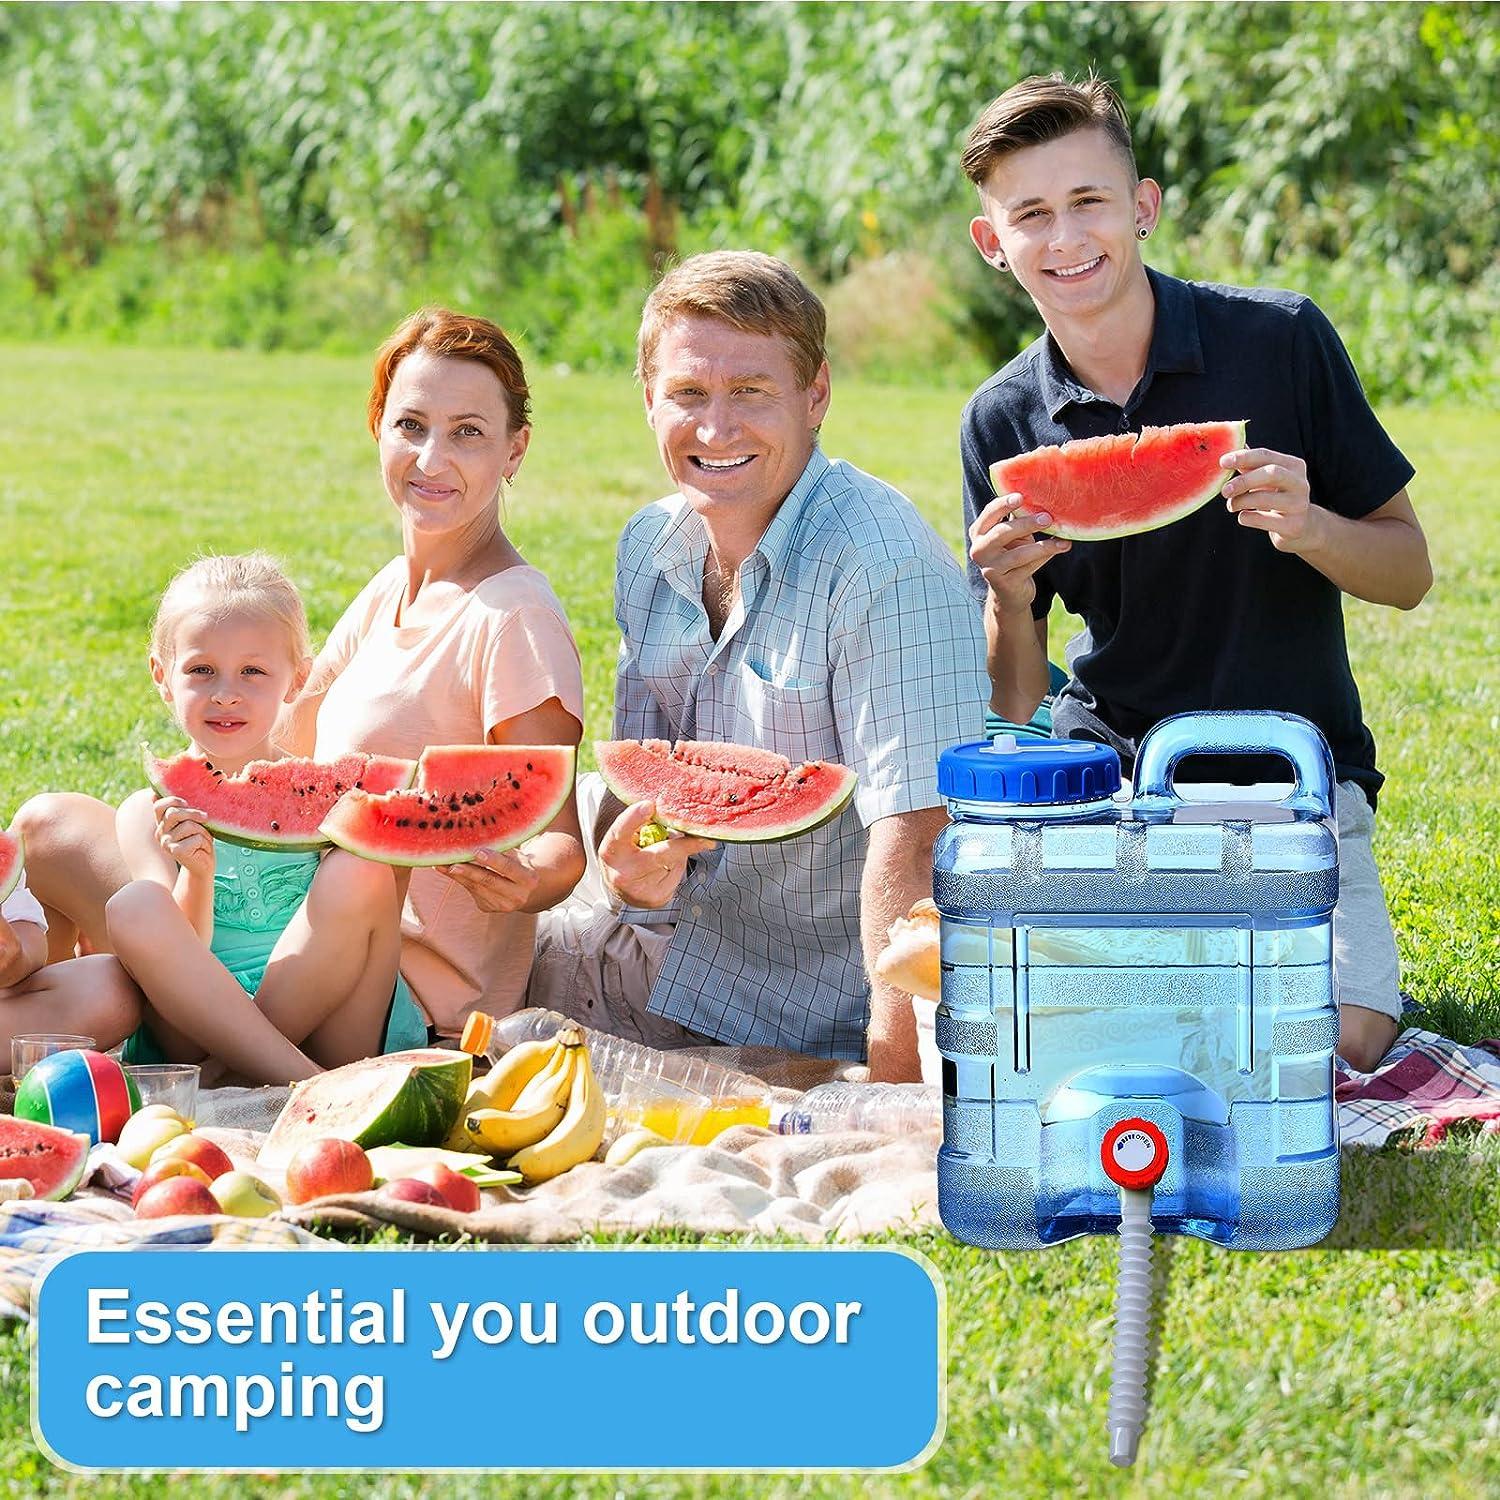 2 Pcs Portable Water Storage Containers Camping Water Container with Spigot  2.6 Gallon Large Water Tank with Faucet Thick Water Dispenser Carrier for  Vehicle Home Emergency Hiking Camping Outdoors